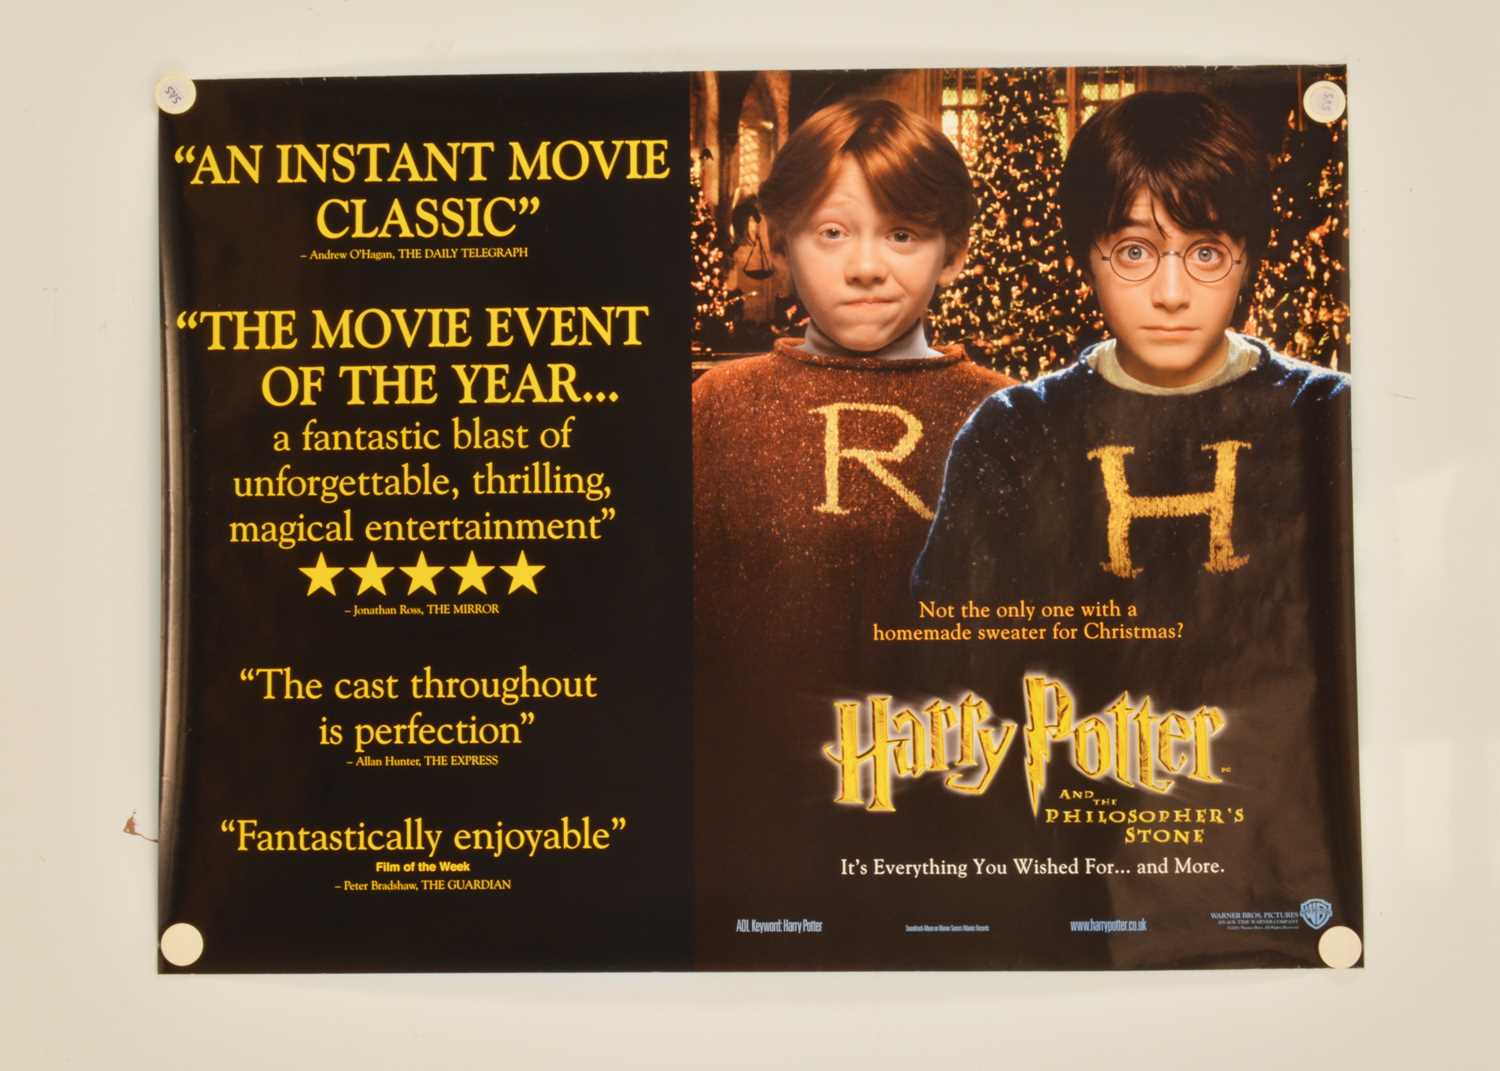 Harry Potter and the Philosopher's Stone Film Posters, - Image 3 of 3